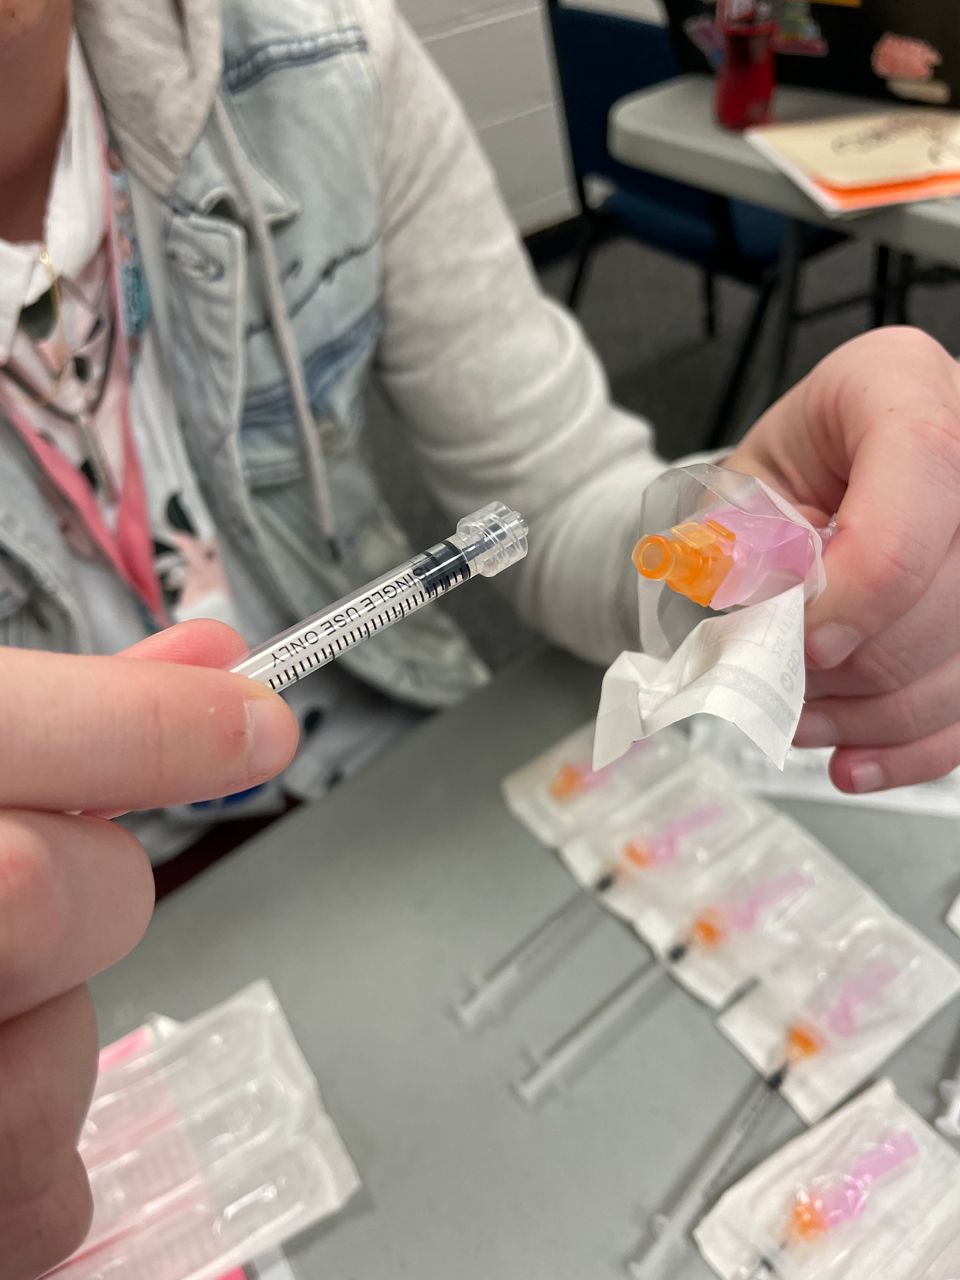 JCPS hosts vaccine clinic at Iroquois High School (Jefferson County Public Schools)